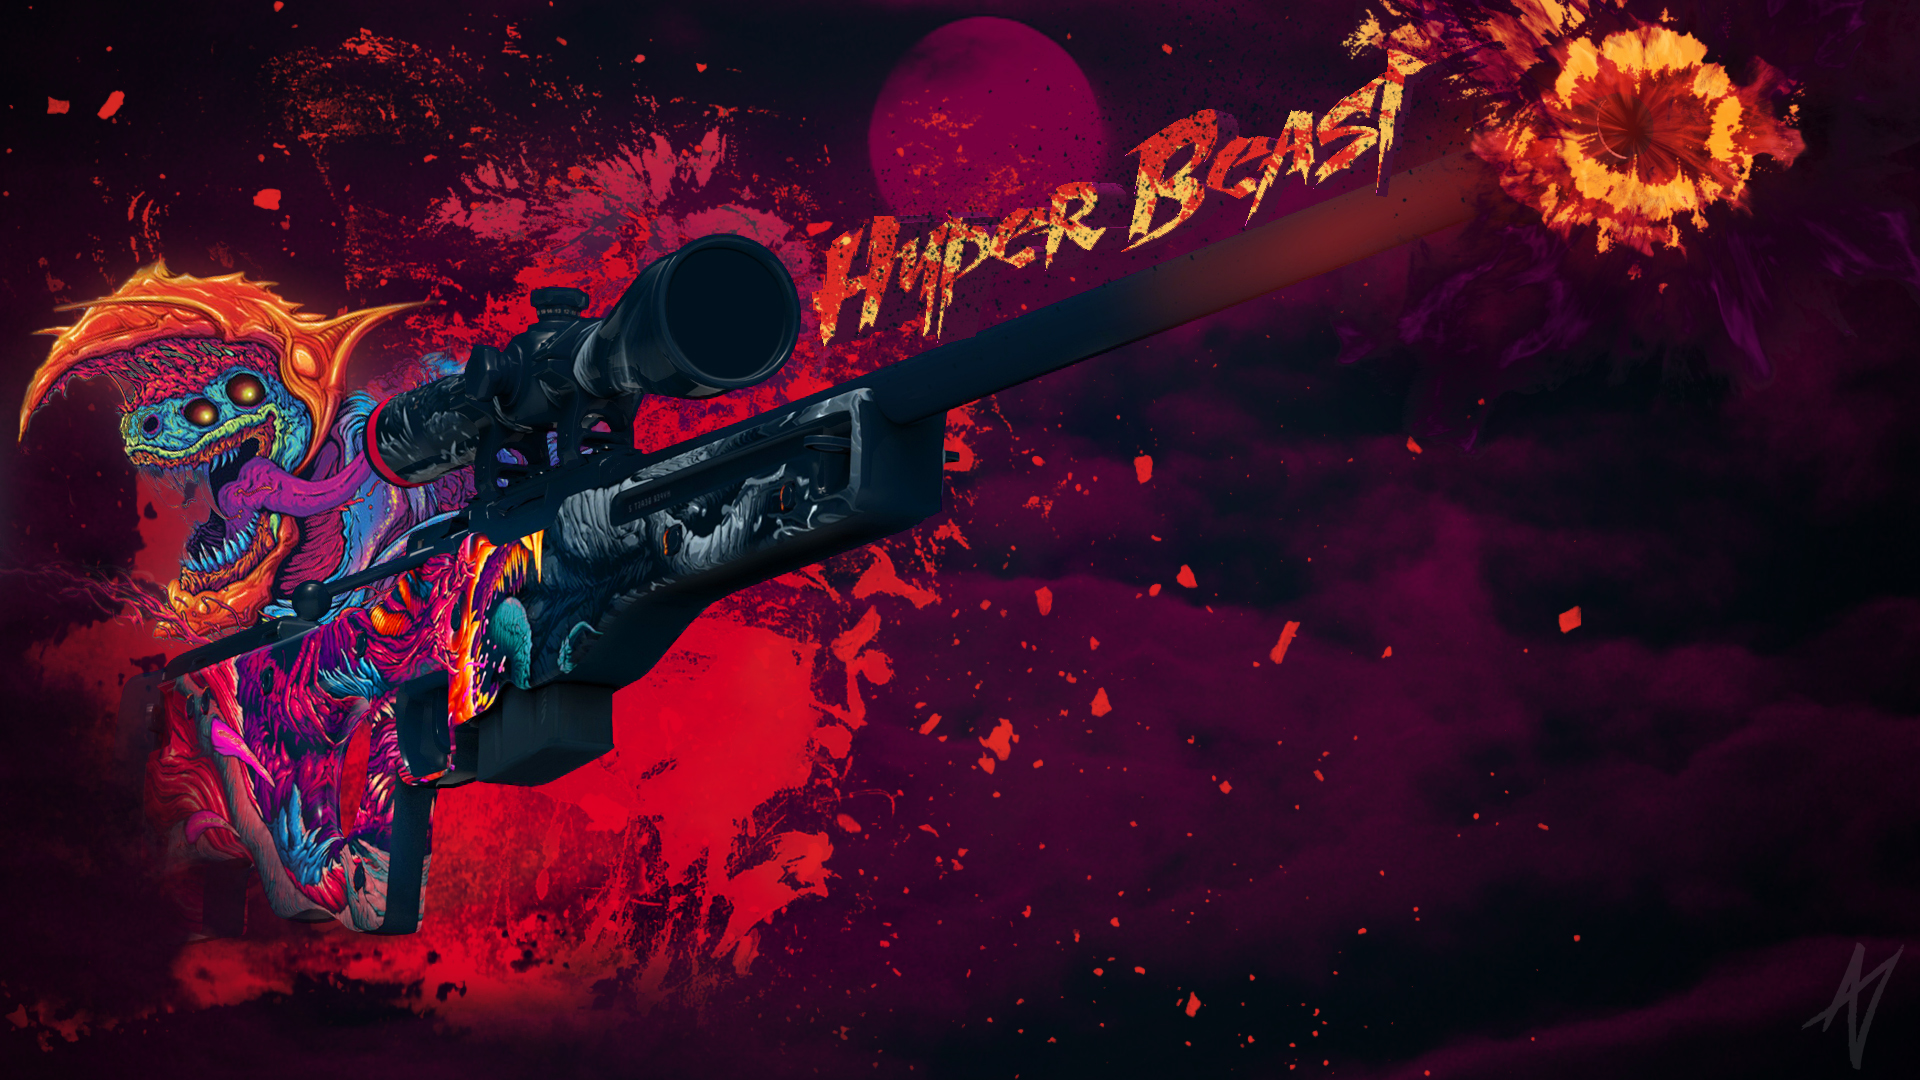 Awp Hyper Beast Wallpaper Background Pictures